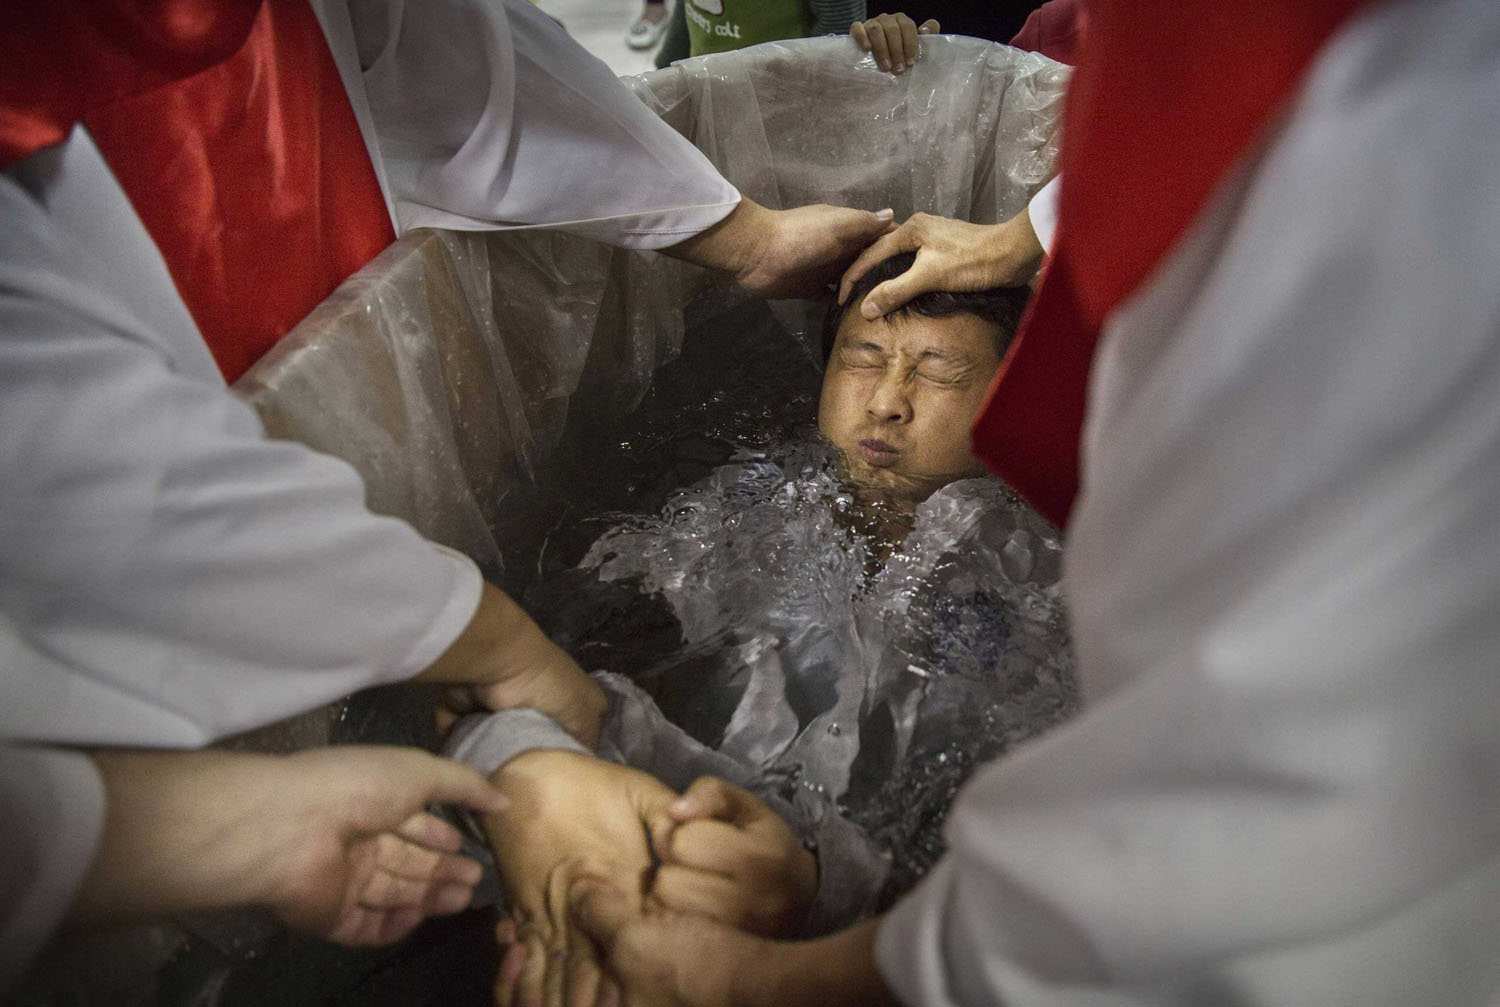 A new Chinese Christian man is dunked in the water in a small tub as he is baptized during a ceremony at an underground independent Protestant Church on Oct. 12, 2014 in Beijing, China.